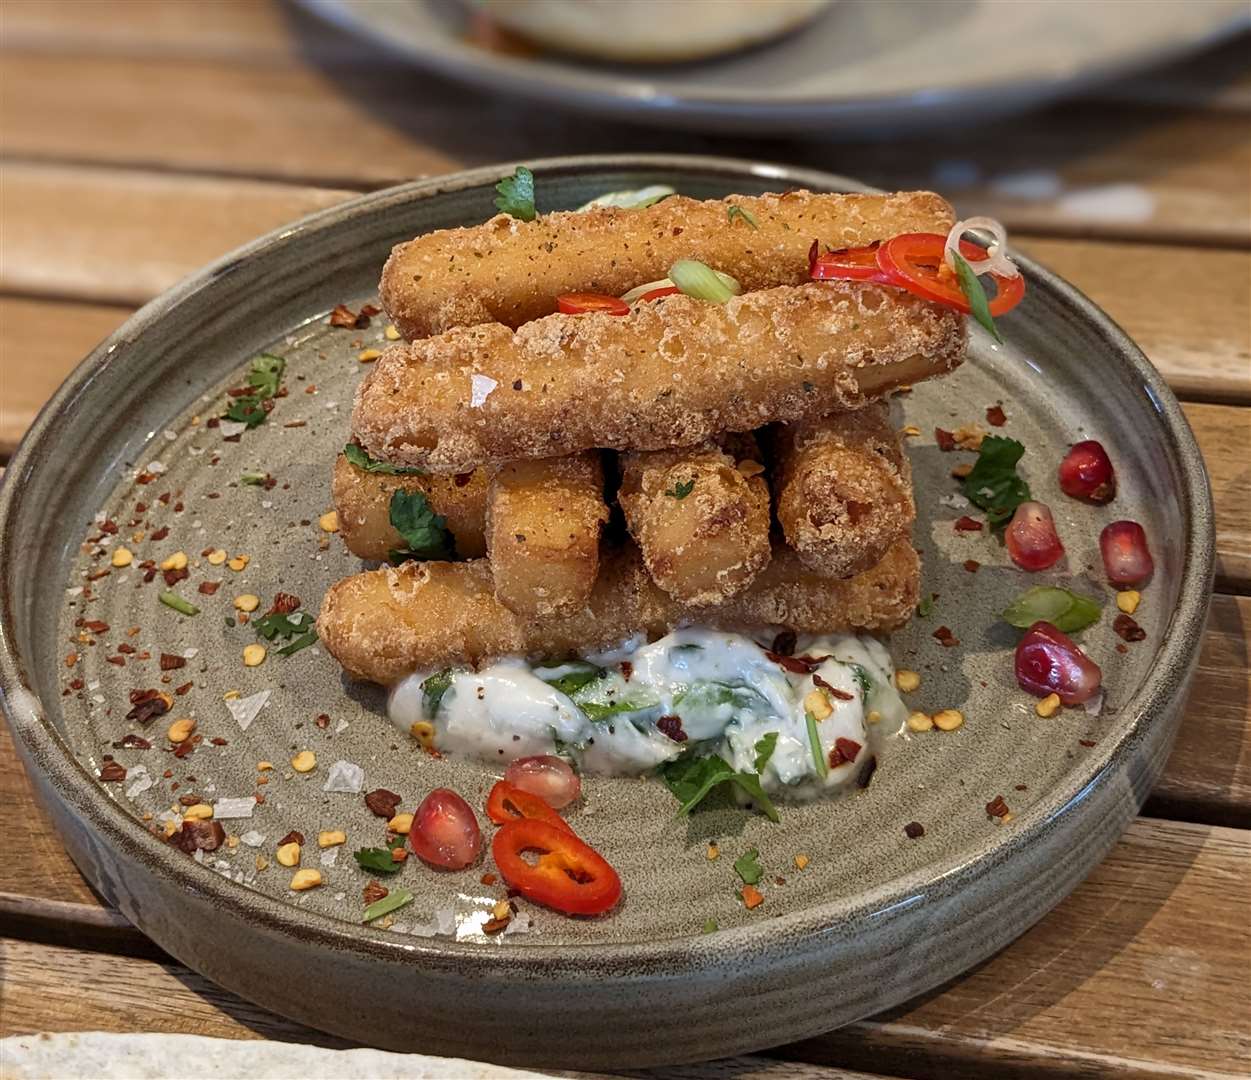 We chose the halloumi fries from the tapas menu. Picture: Suffolk News